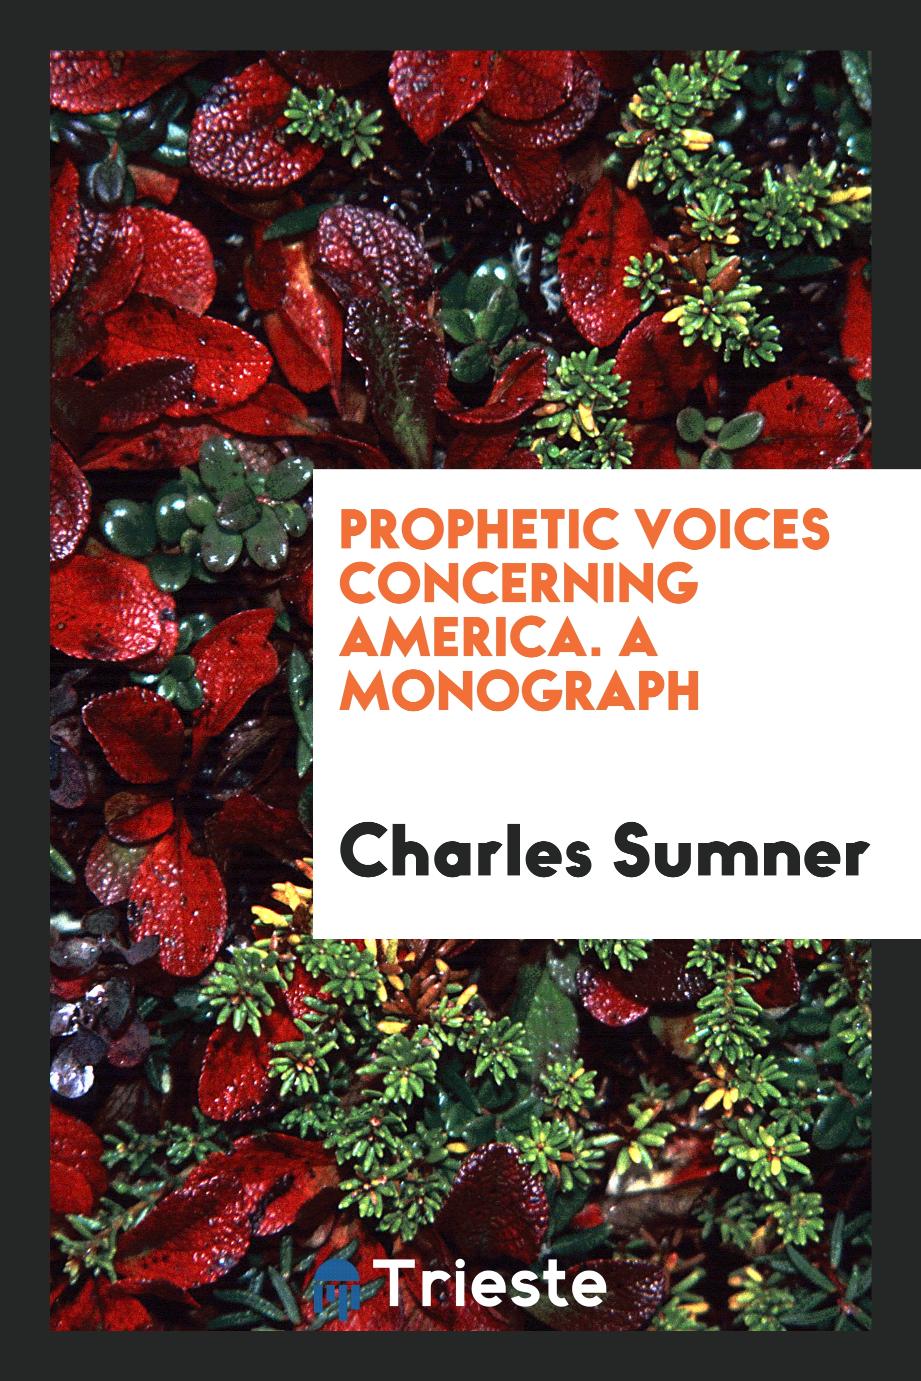 Prophetic voices concerning America. A monograph